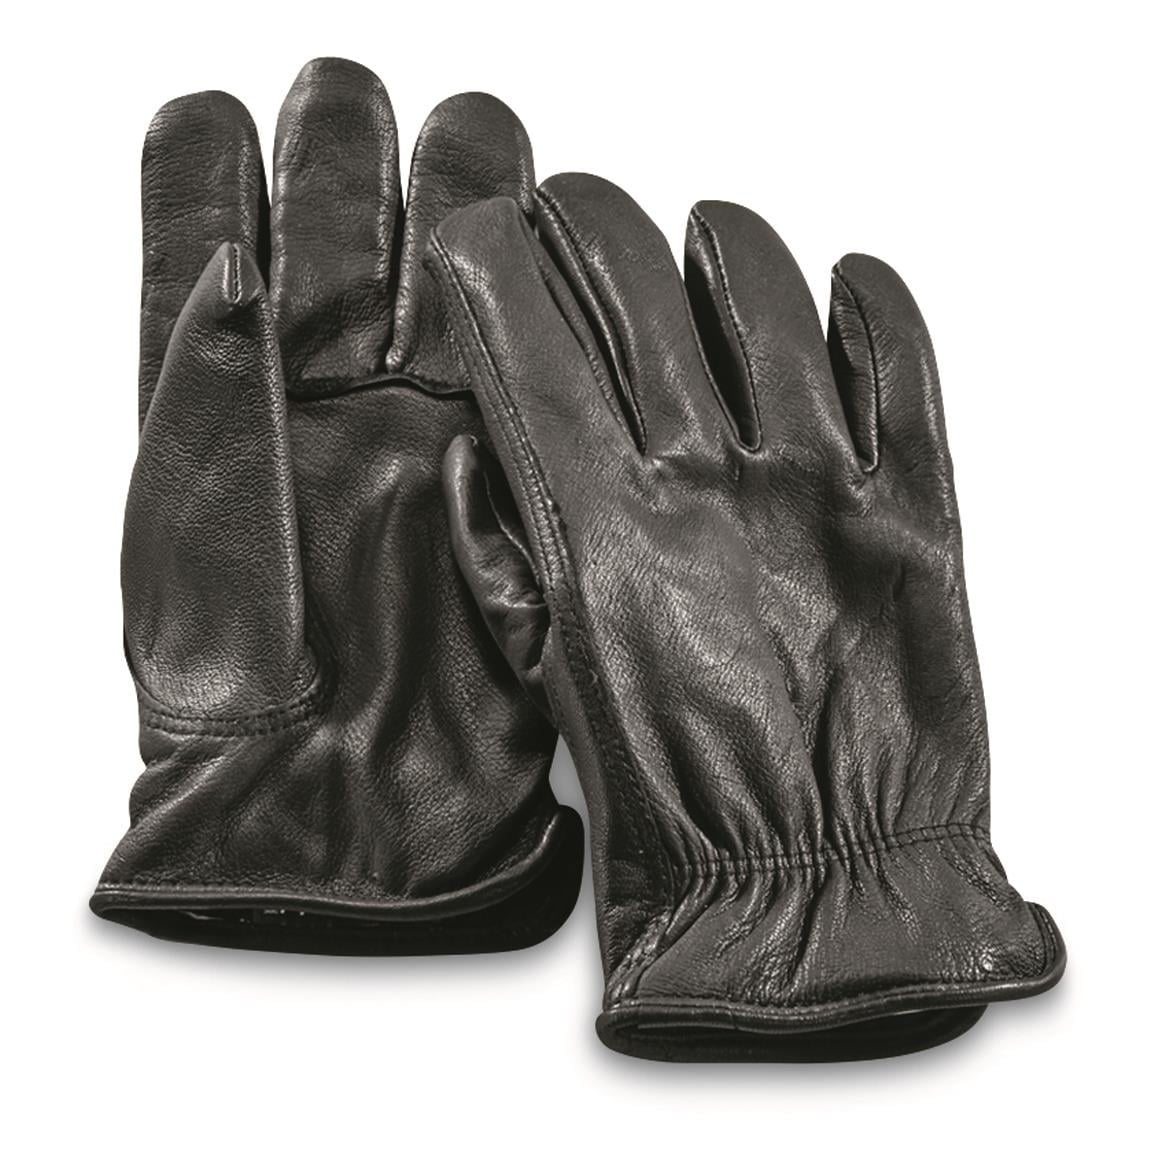 3M Thinsulate Lined Water Repellant Deerskin Leather Work Gloves